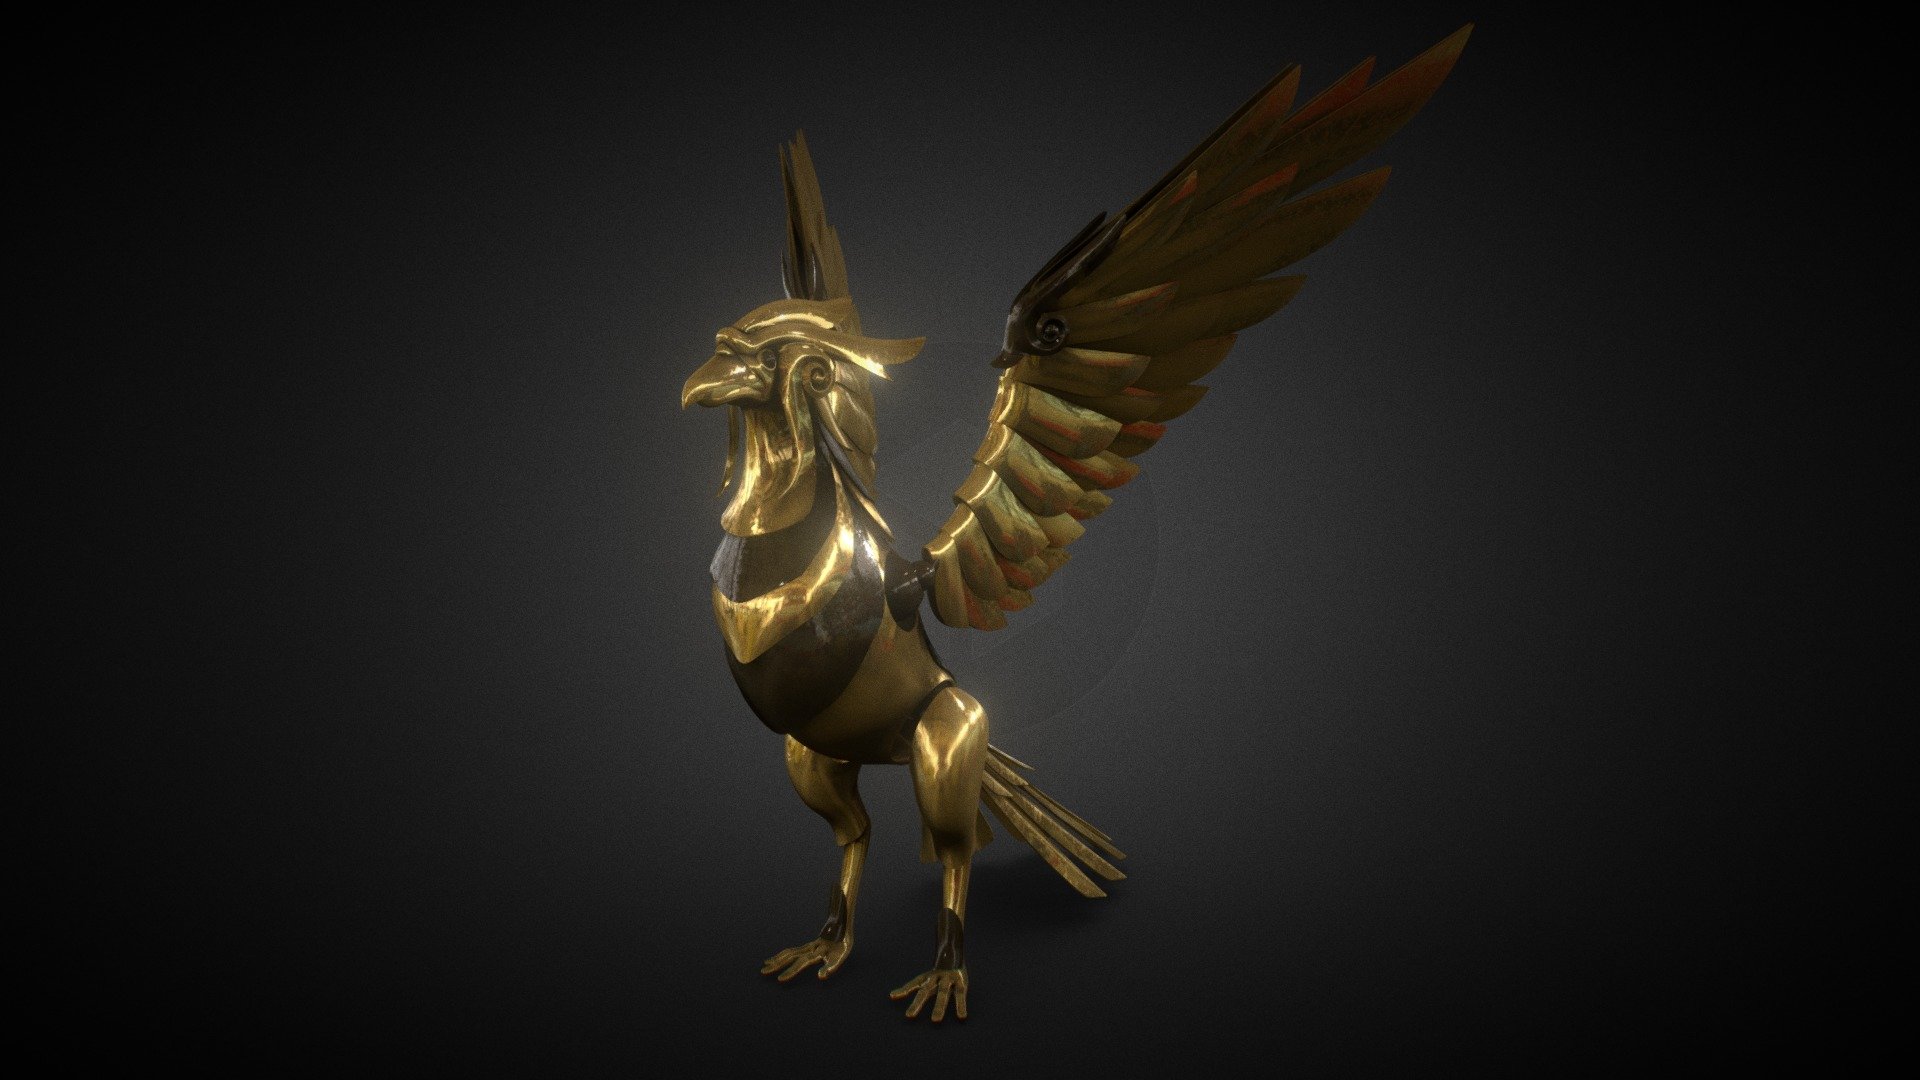 A very beautifully model of a styled mechanical phoenix. 

Originally created with 3ds Max 2014 using FinalRender. This version now has native Cinema 4d file with light, materials and textures setted. Also has 3dsmax for Default Scanline and iRay.

|| USAGE ||

This model is suitable for use in broadcast, high-res film close-up, advertising, games and so on. 

|| SPECS ||
Very good topology for using with meshsmooth. Low poly model has about 9k polygons. 

This model contains about 22.404 polygons with TurboSmooth ON

No rigging or animation yet.

|| TEXTURES||

High Resolution Texture Maps including ambient occlusion map, roughness, bump, a HDR for reflections and texture with ground shadows baked. 

Ground: 1024x1024px
Ambient Occlusion: 4096x496px
Roughness and Bump: 4096x2048px

Including:
* .max
* .c4d
* .fbx
* .obj
* .3ds - Mechanical Phoenix - Buy Royalty Free 3D model by quartomundo 3d model